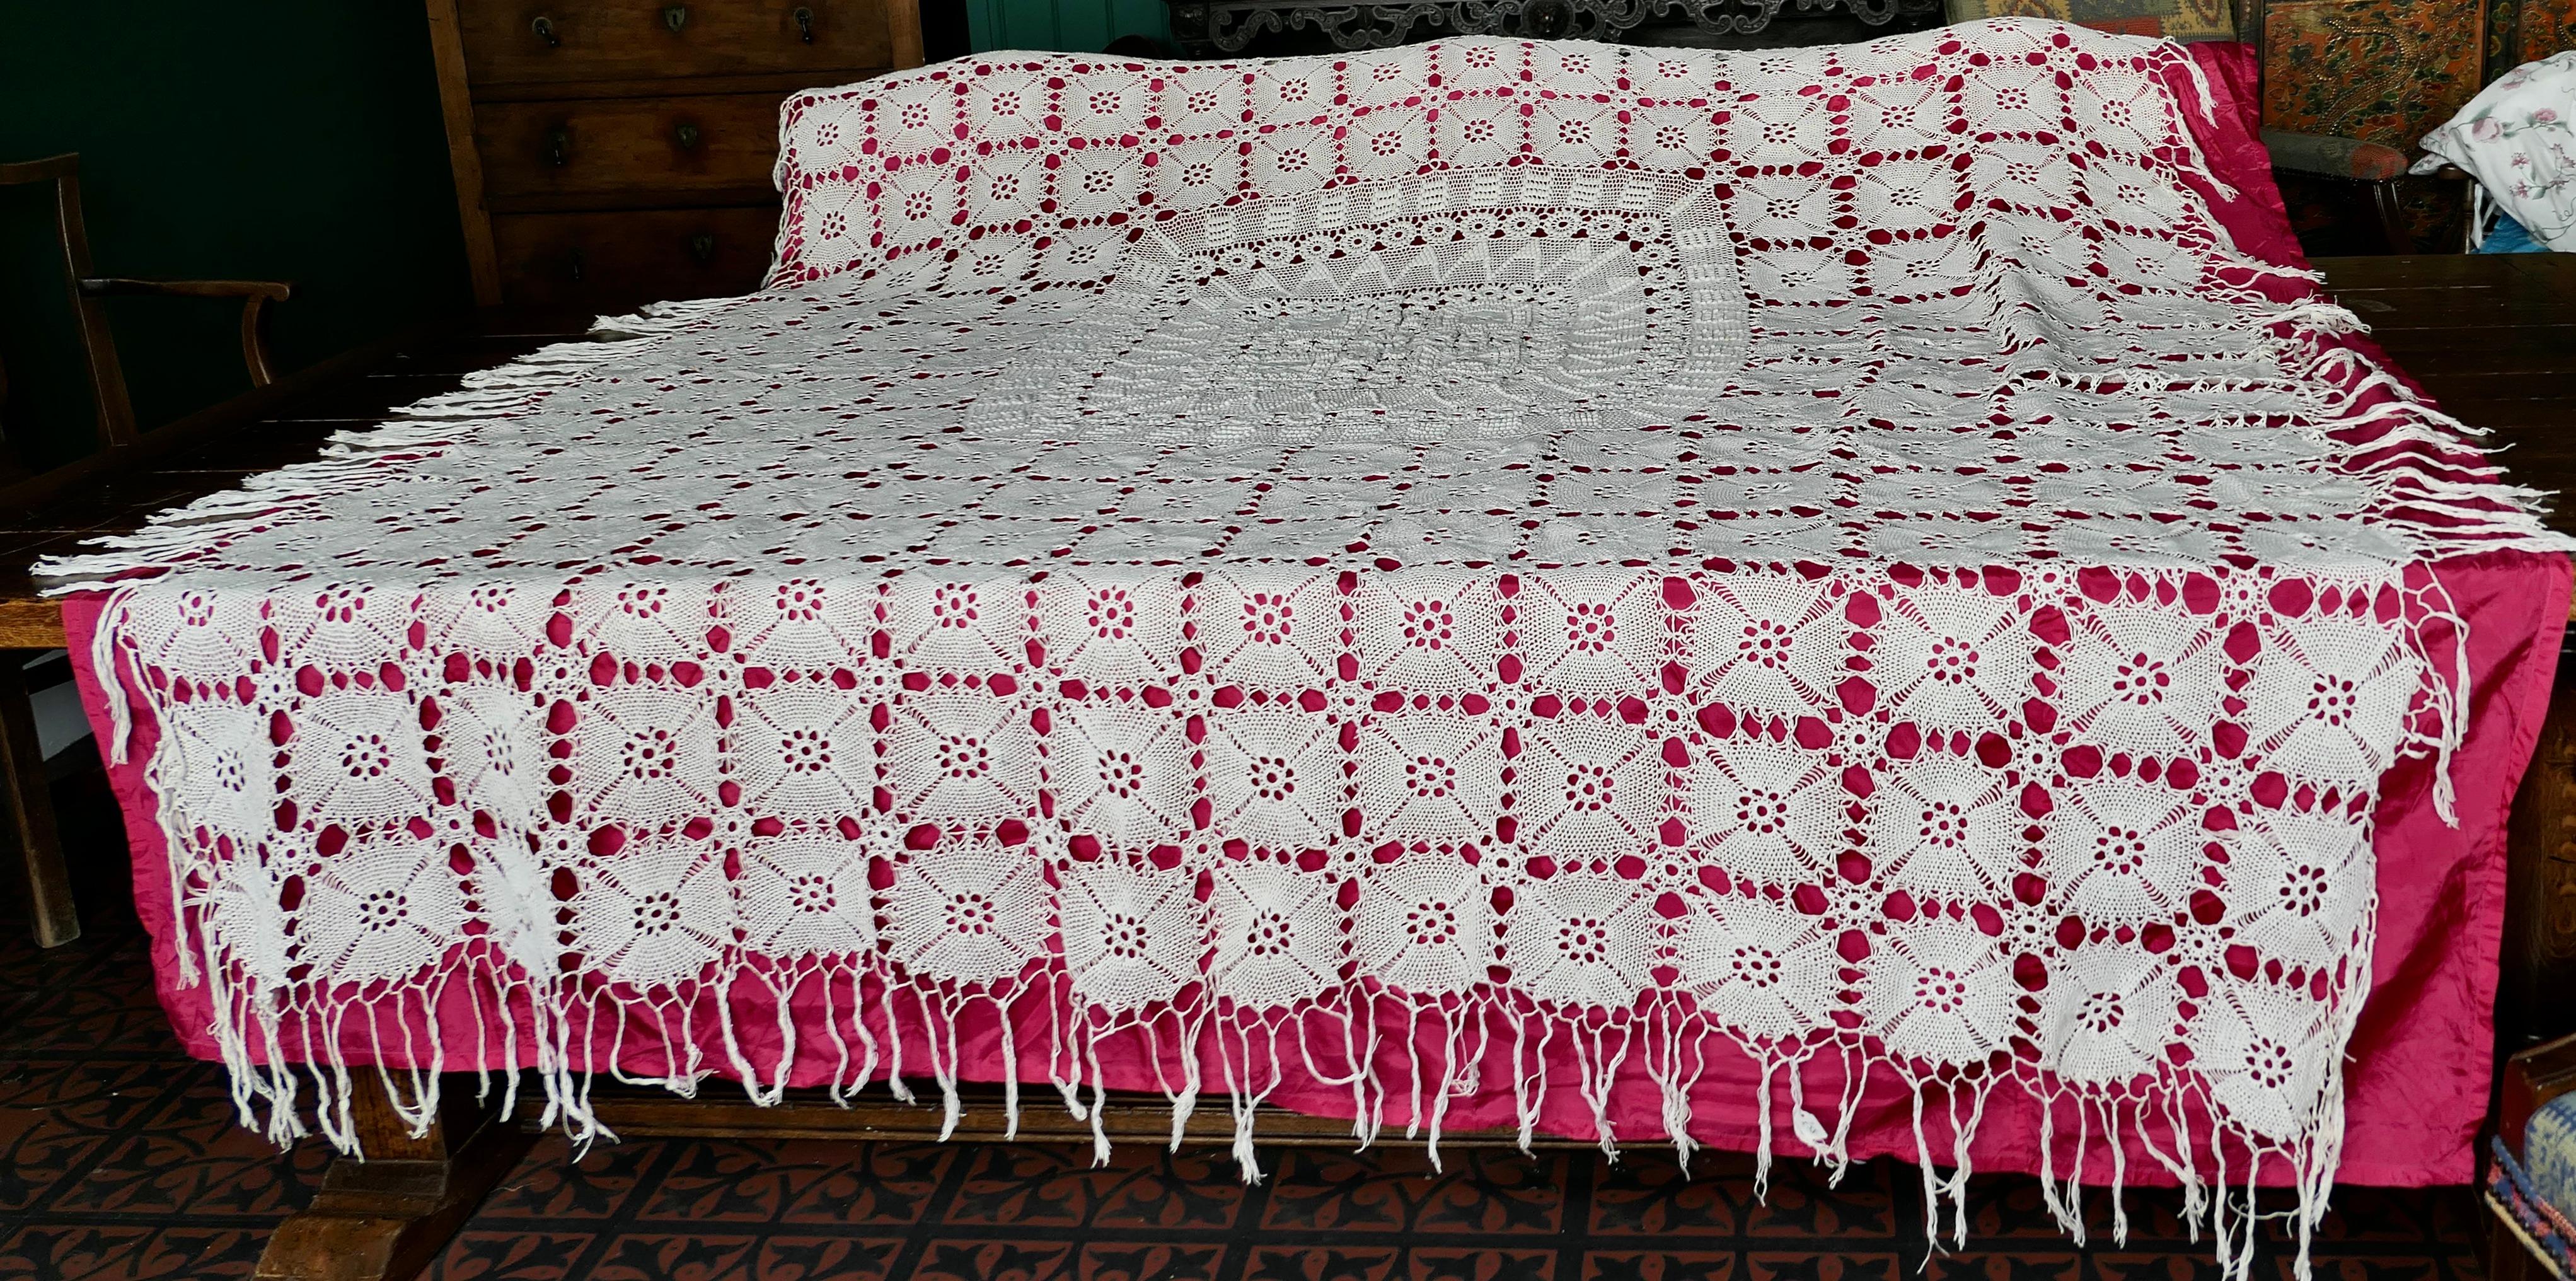 Vintage French heavy hand crochet bed cover or table cloth.
This is a beautiful hand made piece, it is made in cotton it is in very good condition and has never been used it has just been displayed on a double bed, it is 74” x 87” including the